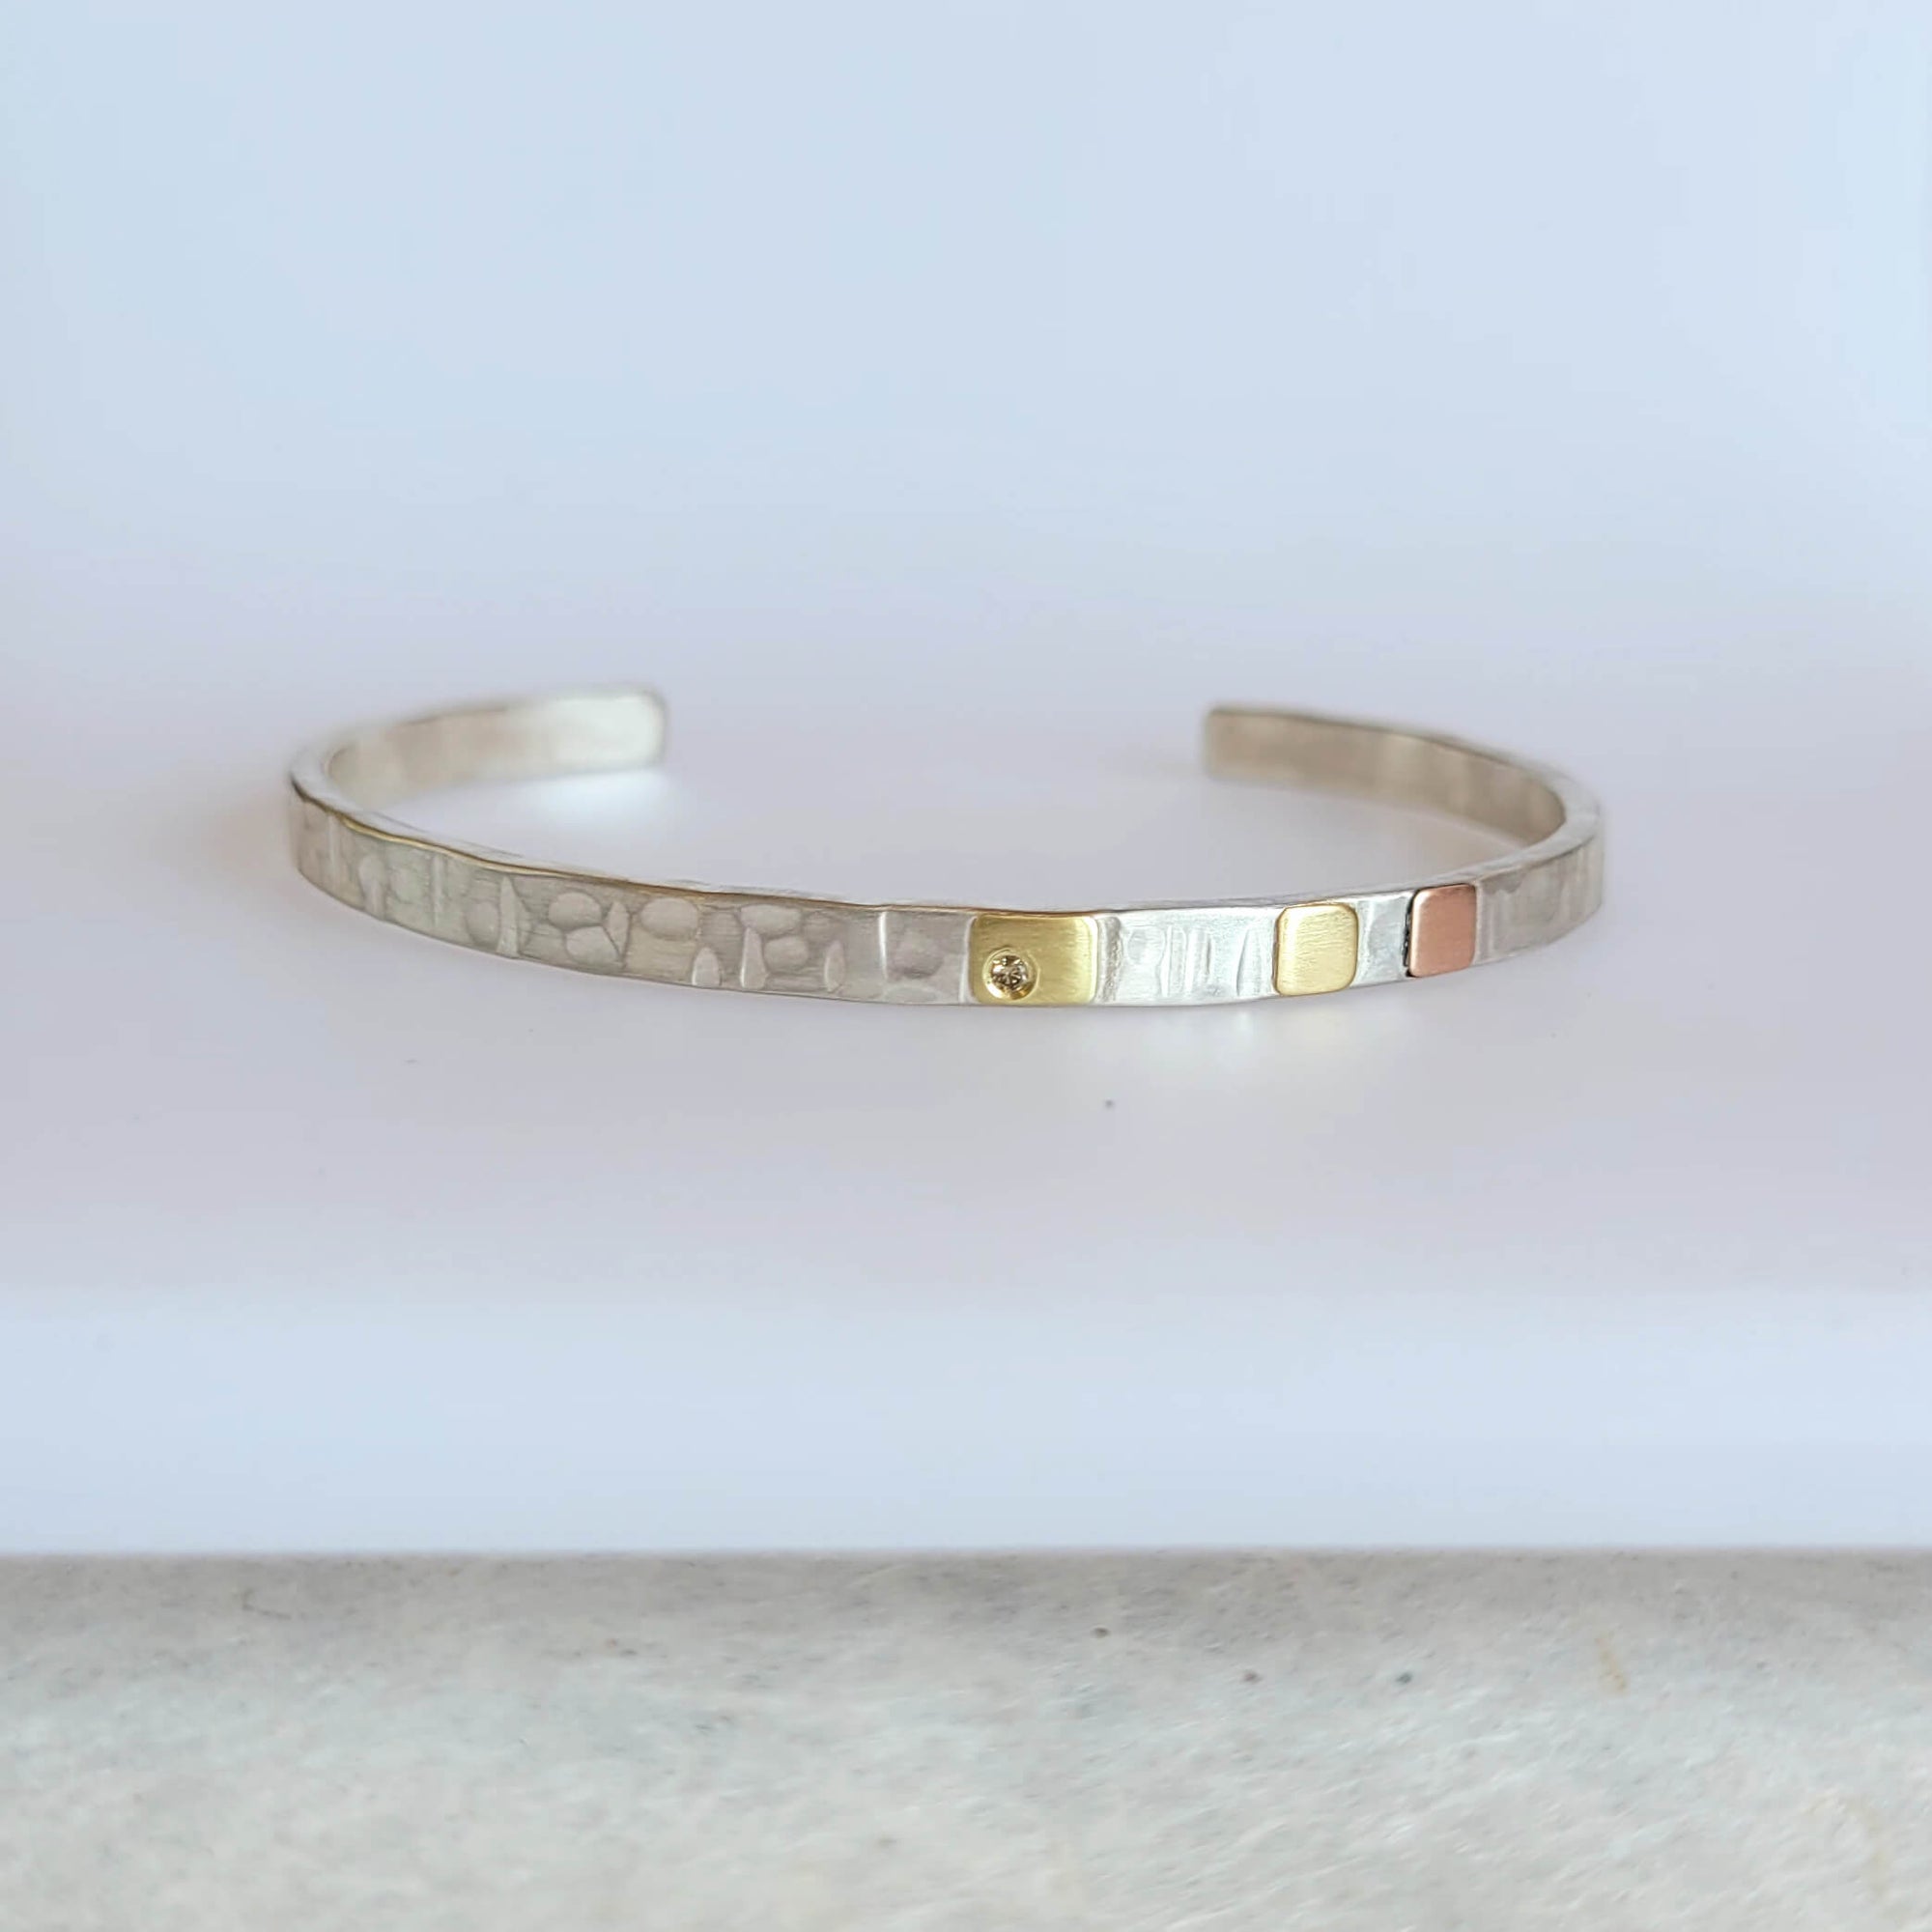 4mm Cell Cuff in Hammered Sterling Silver with Gold and Diamond Accents